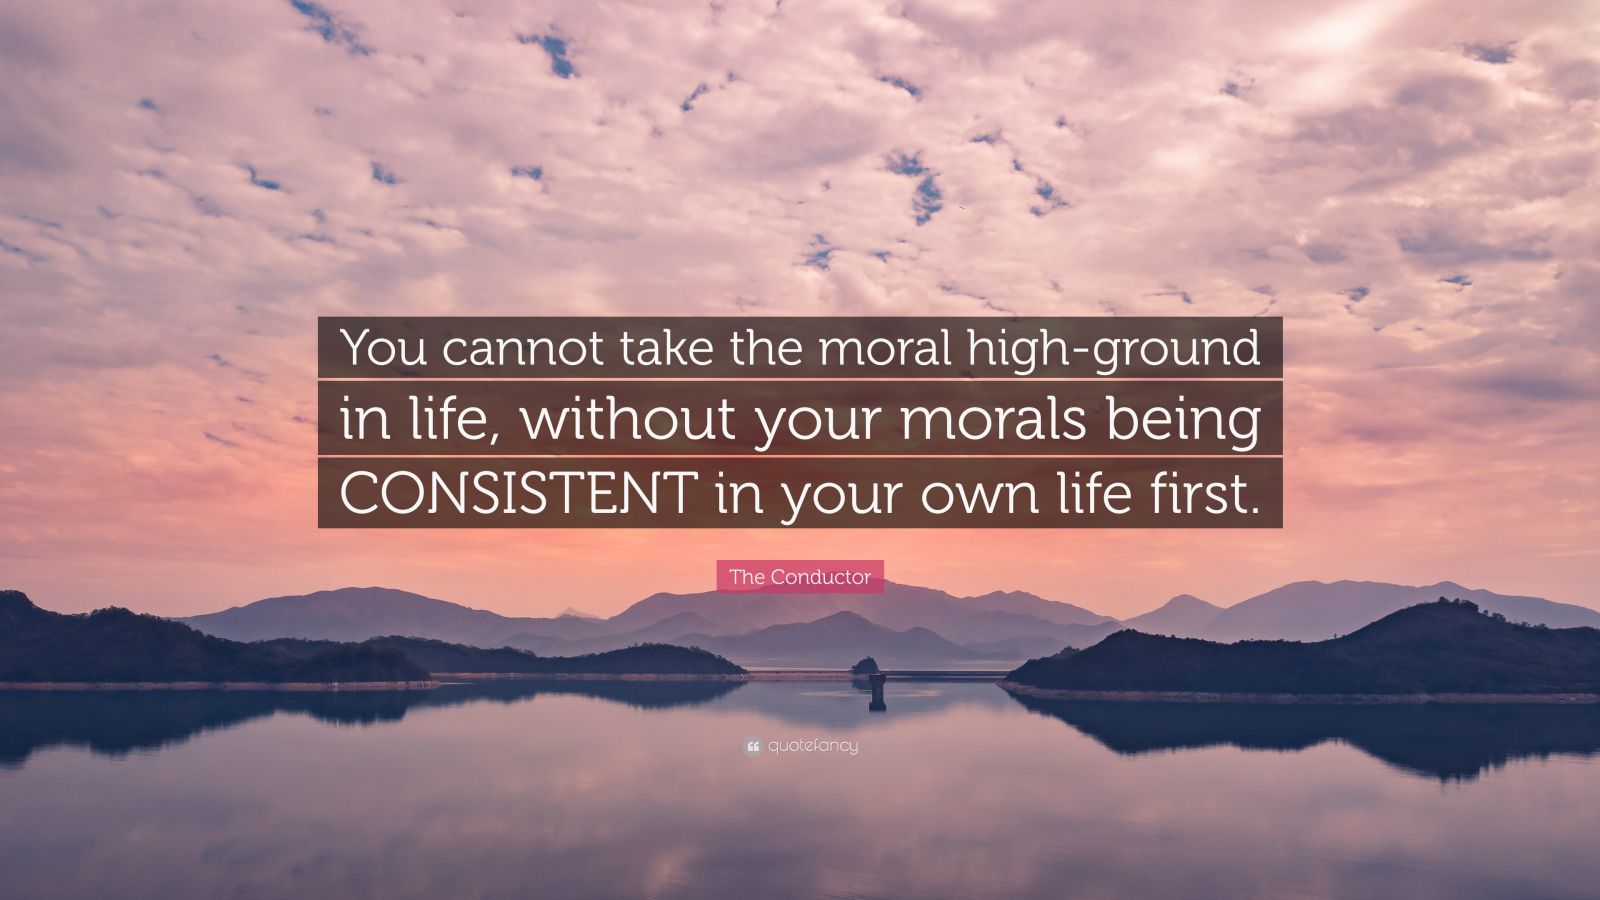 The Conductor Quote: “You cannot take the moral high-ground in life ...